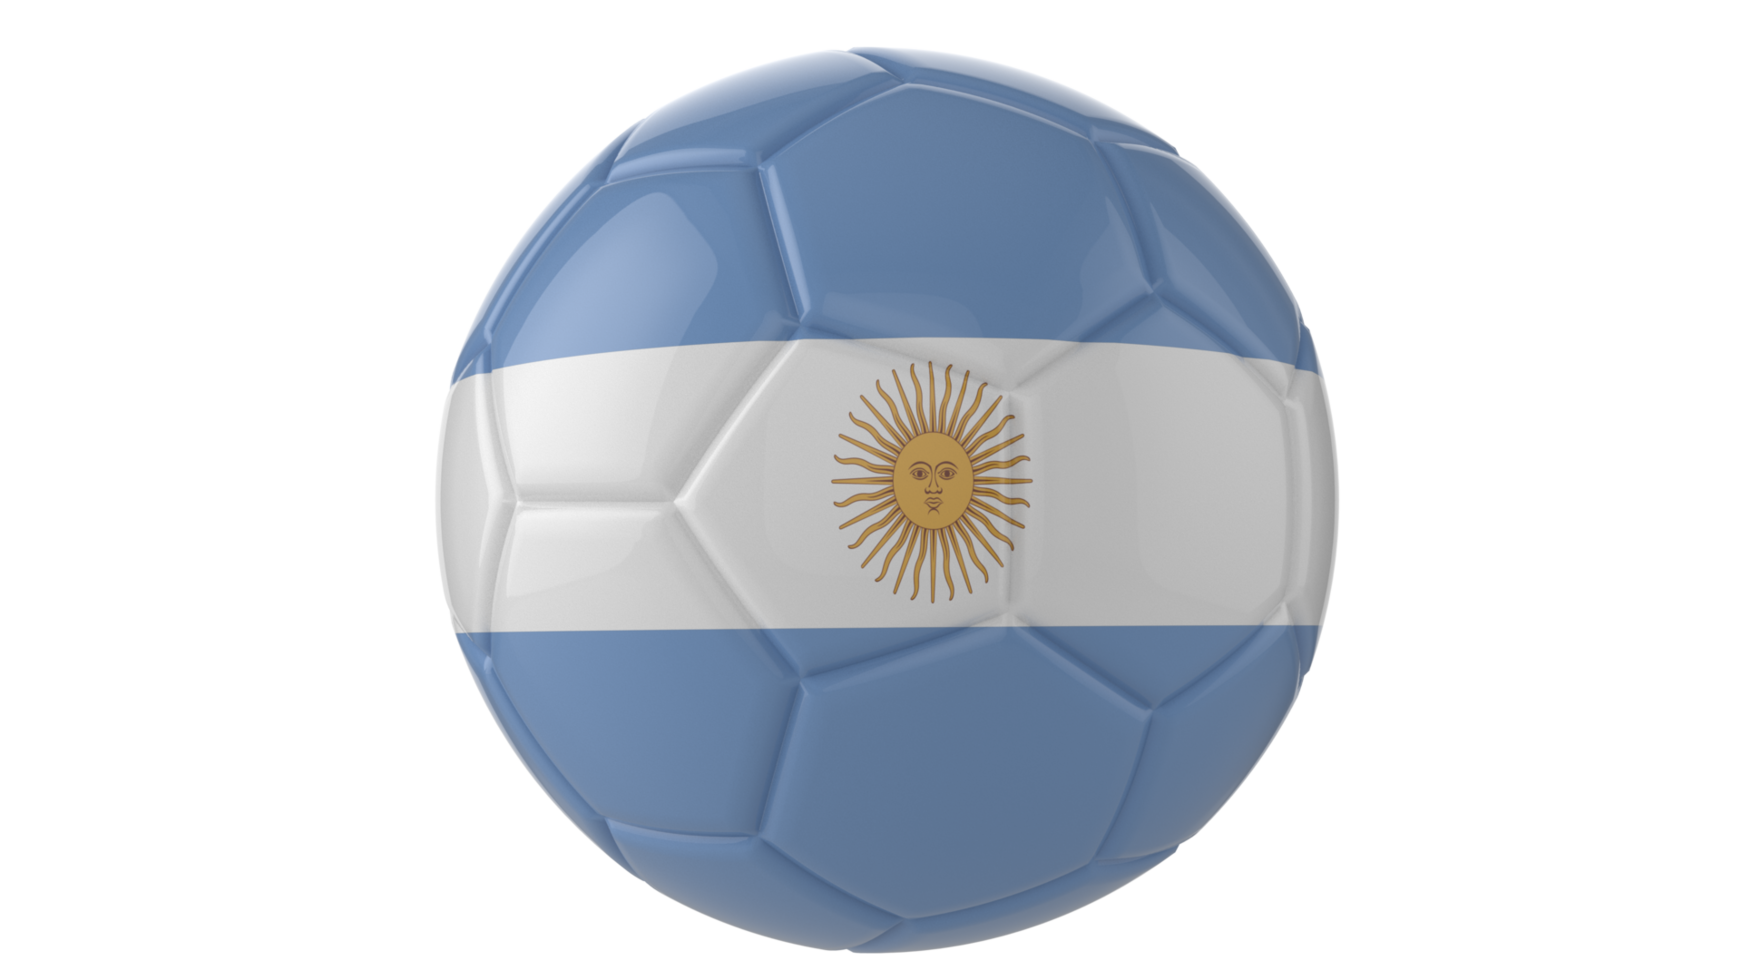 3d realistic soccer ball with the flag of Uruguay on it isolated on transparent PNG background